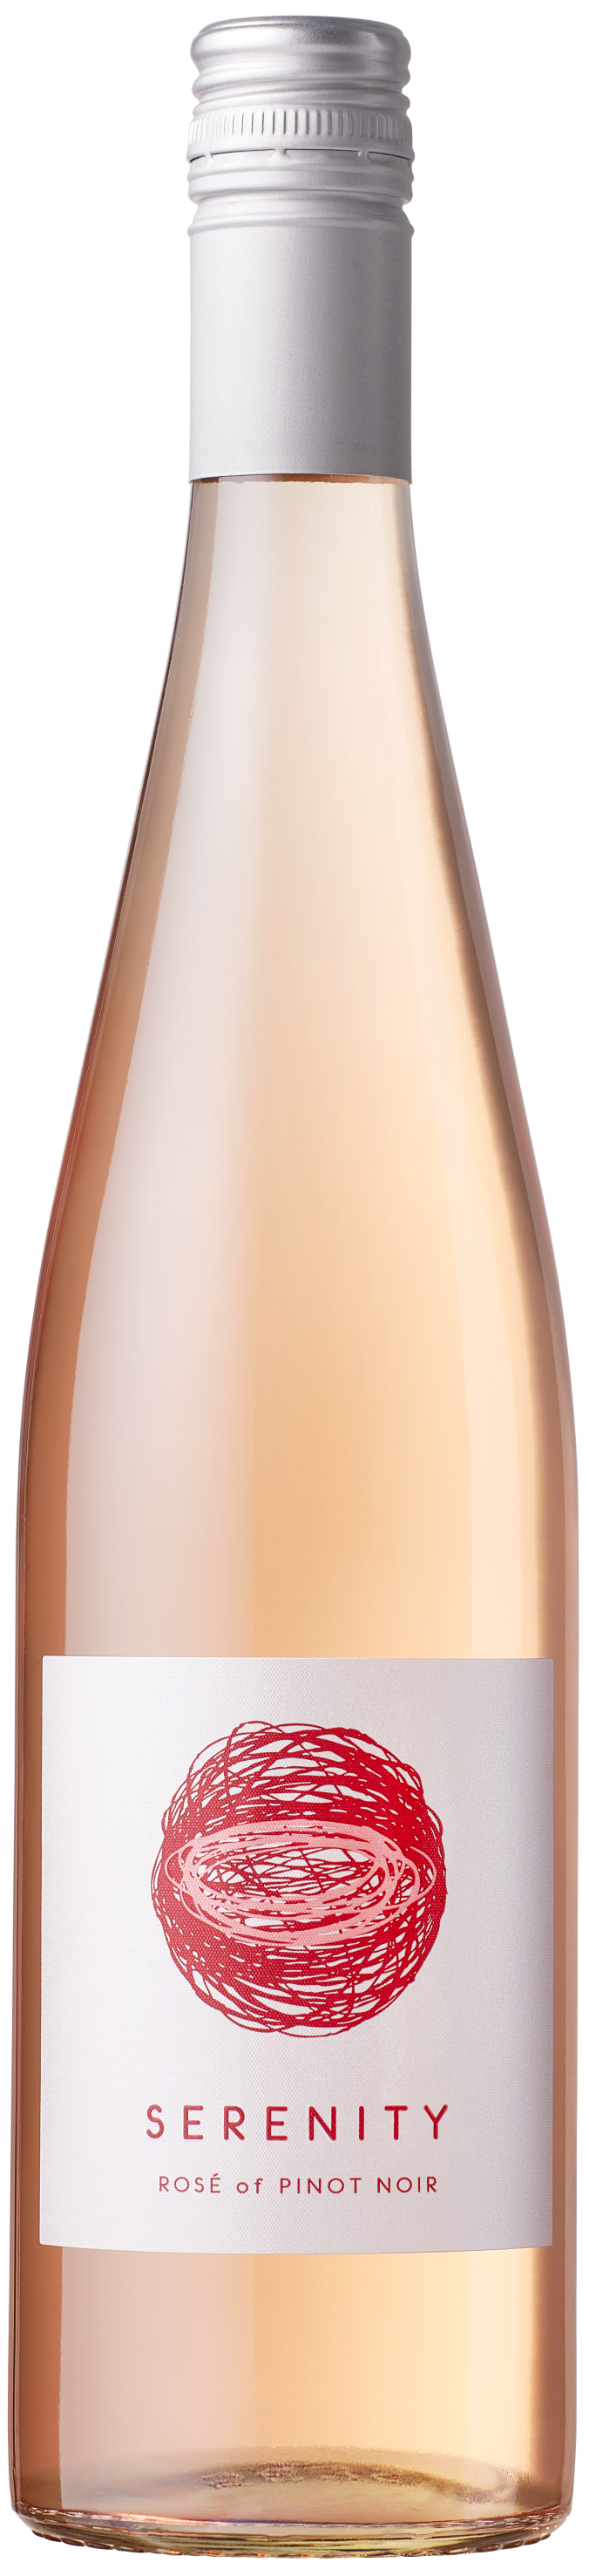 Photo of 2020 Serenity Rosè of Pinot Noir